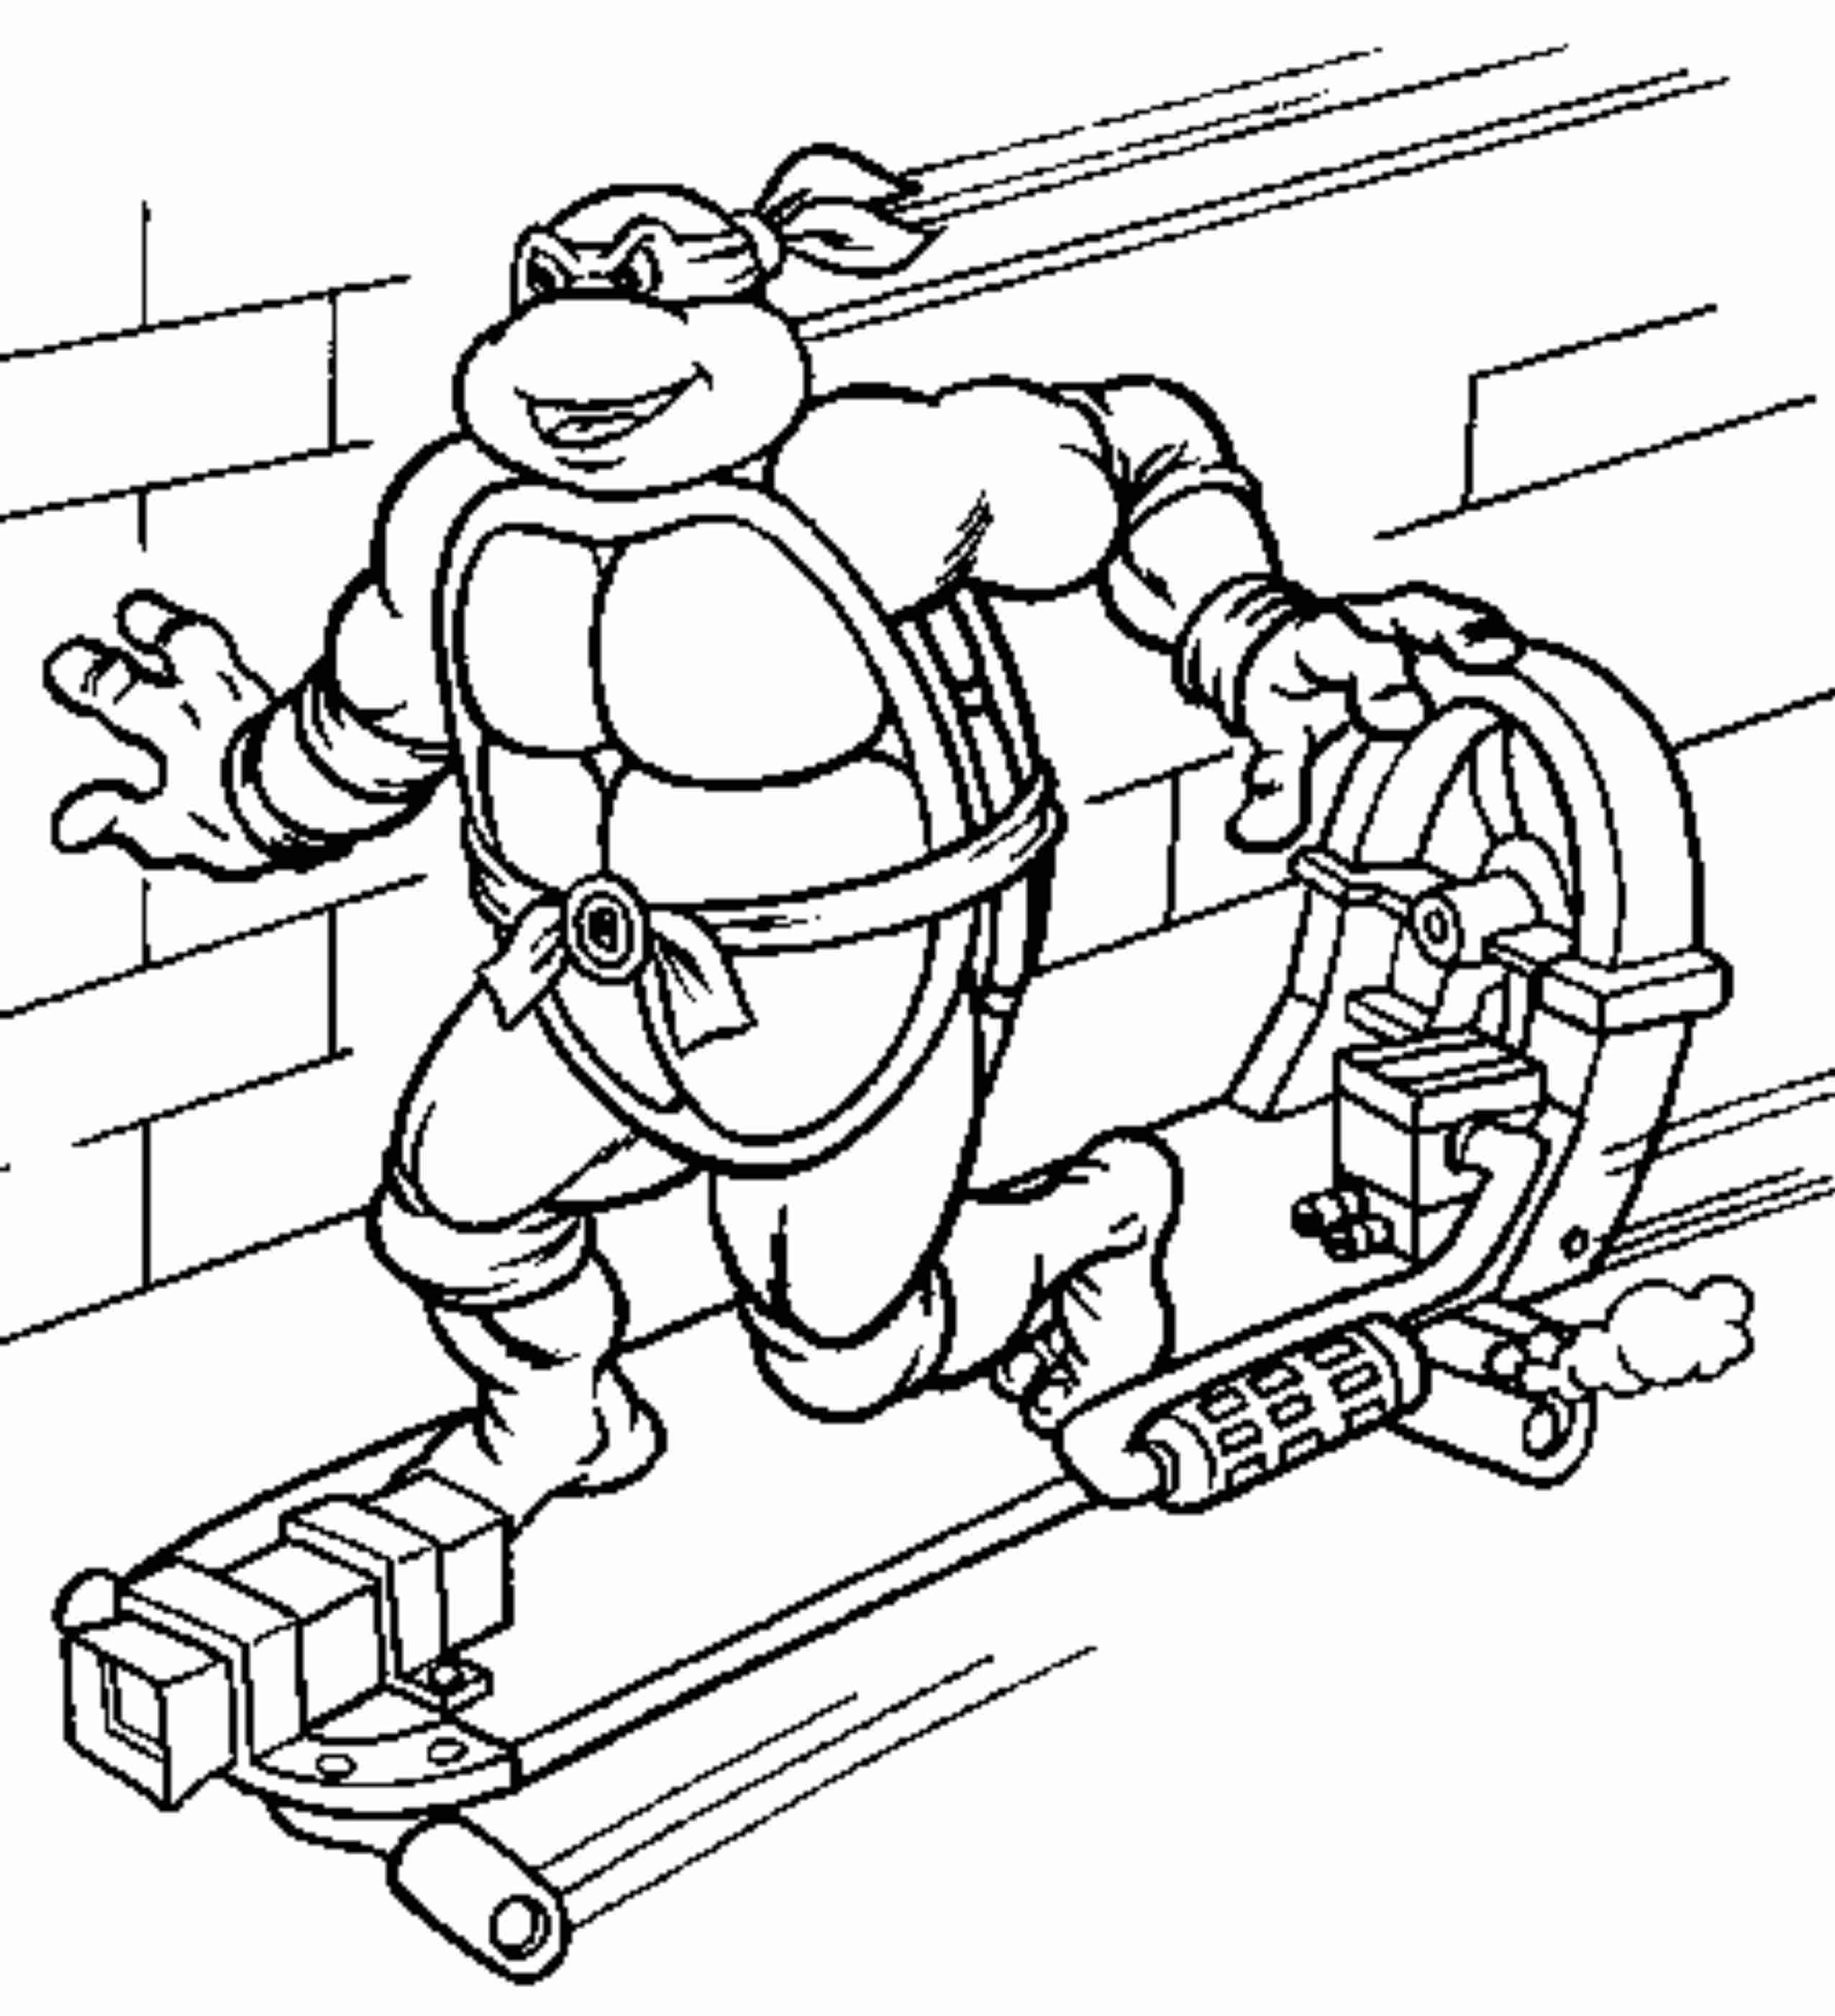 Ninja Coloring Pages For Kids
 The Attractive Ninja Coloring Pages for Kids Activity